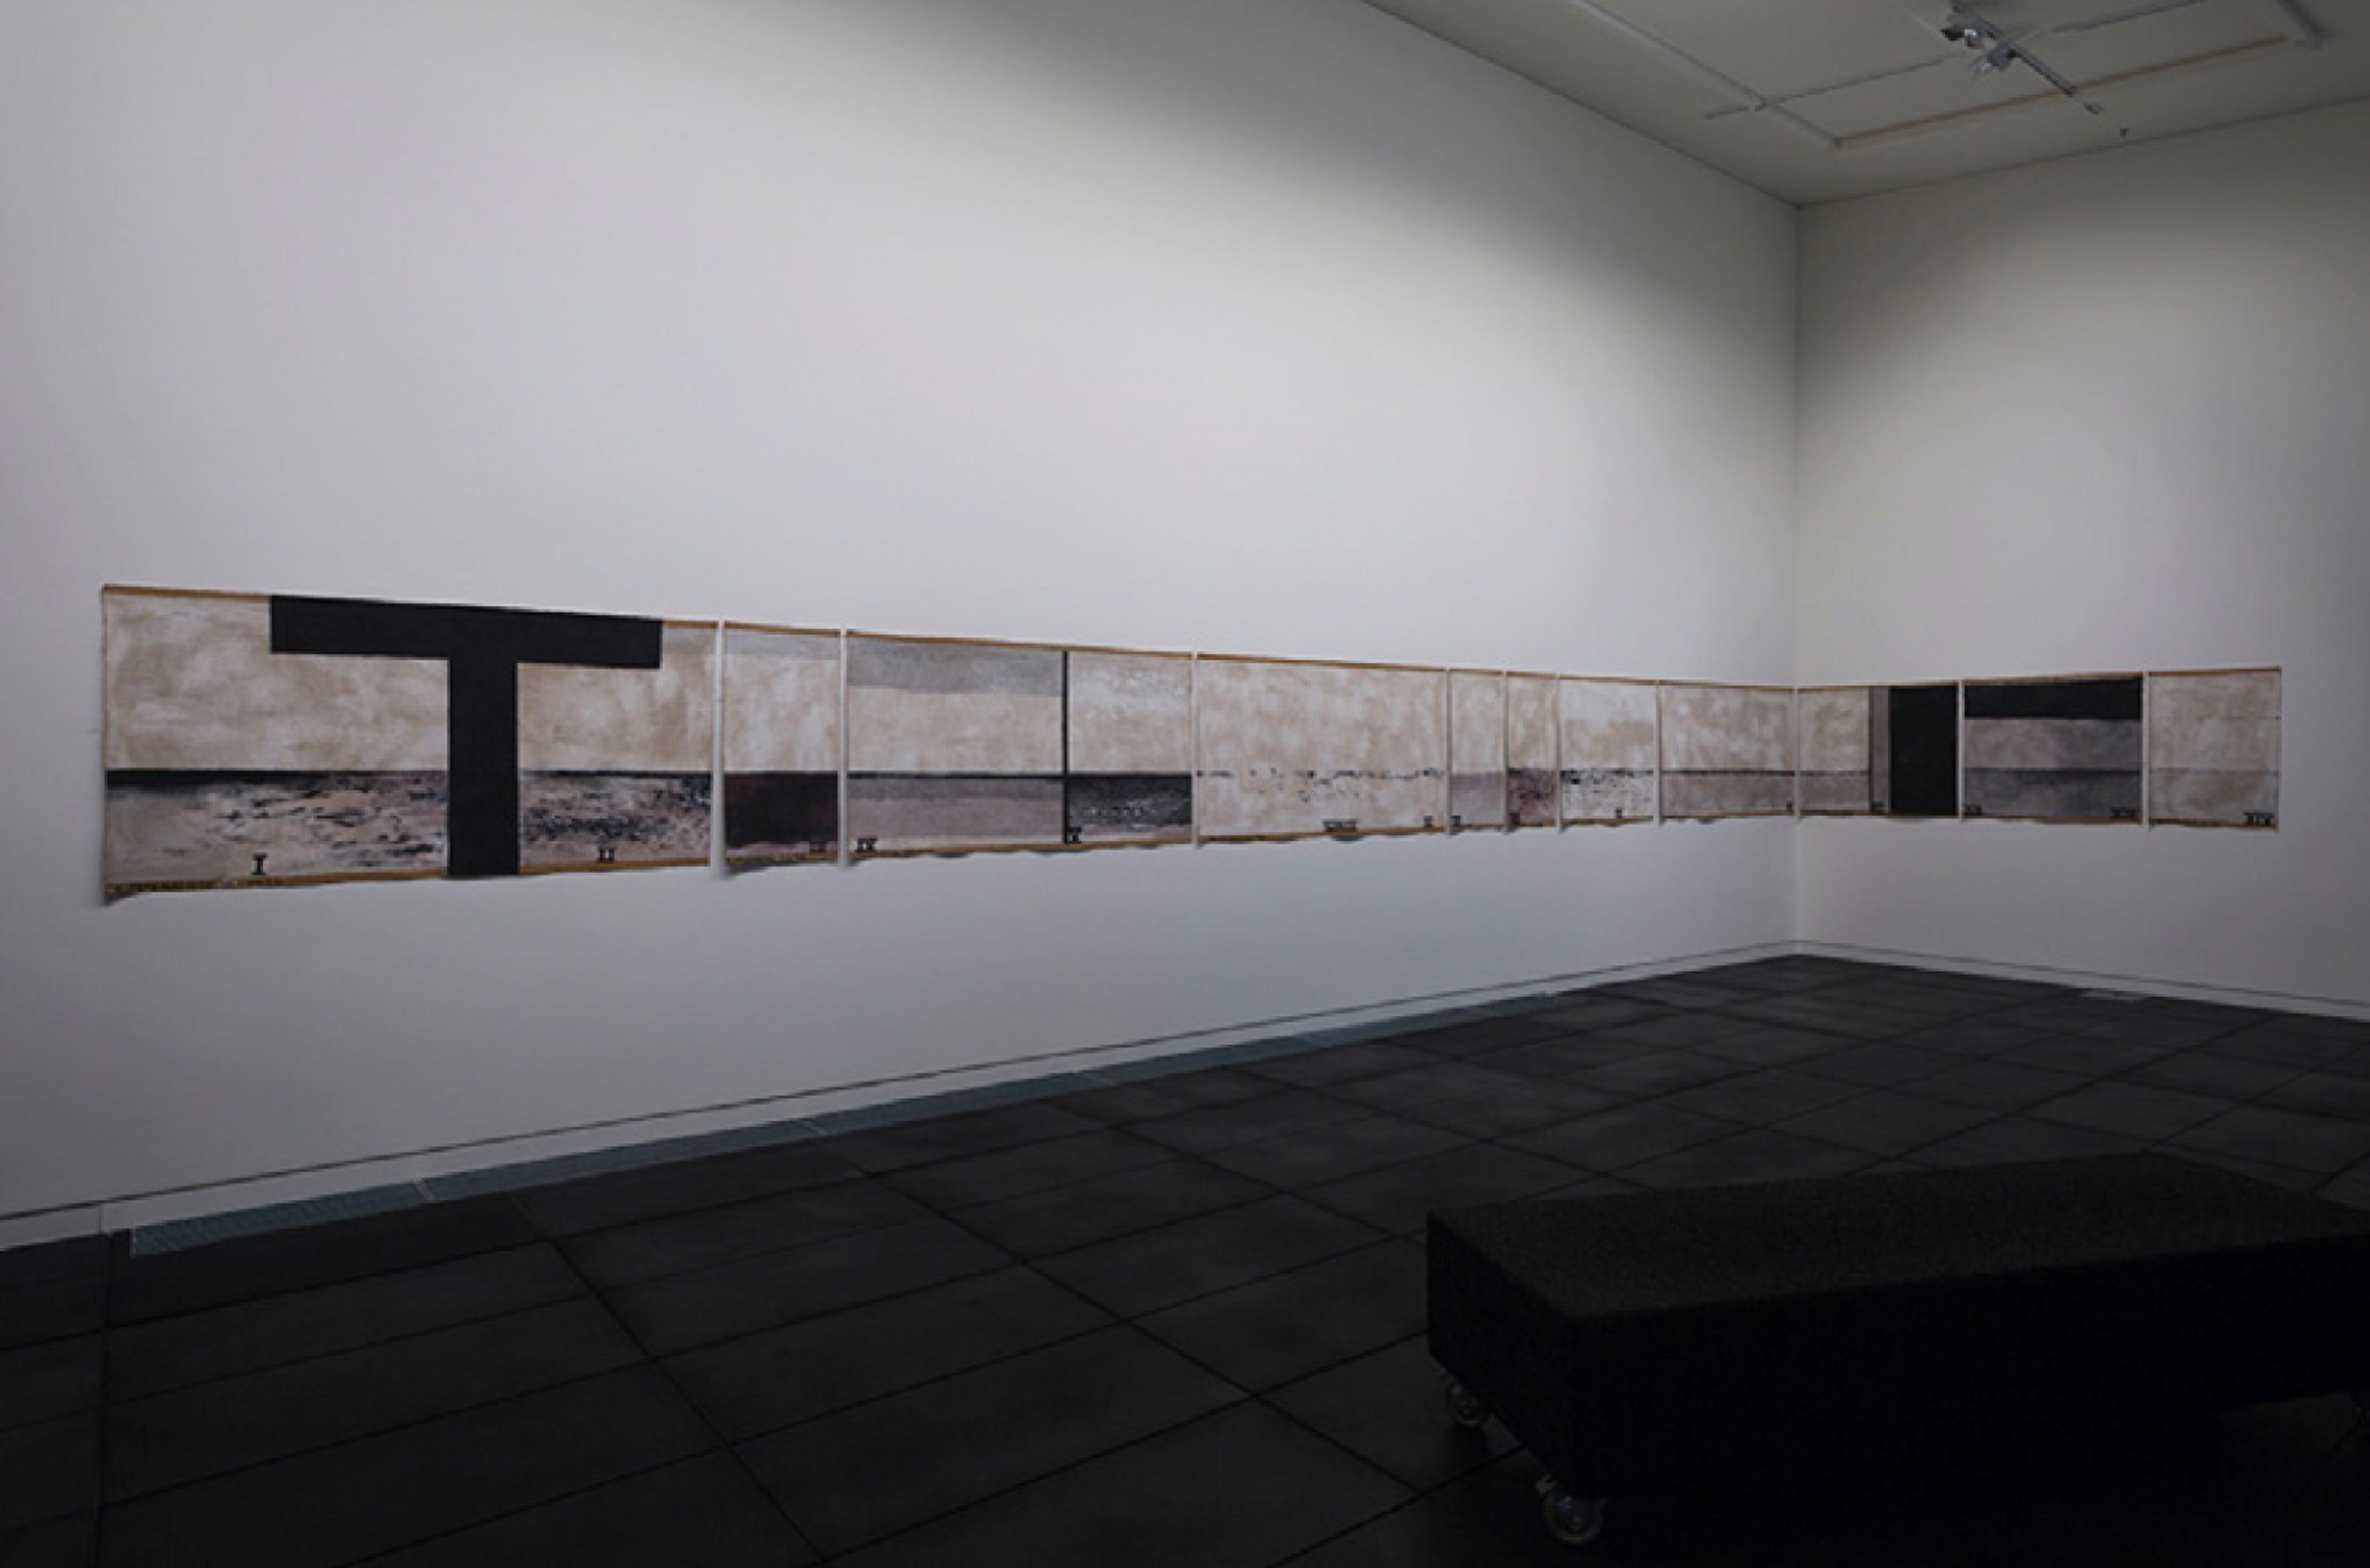 Installation view, The Specious Present, Adam Art Gallery Te Pātaka Toi, Victoria University of Wellington, 11 July–20 September 2015. Colin McCahon, Walk (Series C), 1973, synthetic polymer paint on unstretched jute canvas, 11 panels. Photo by Shaun Waugh. Te Papa (2004-0017-1/A-K to K-K)